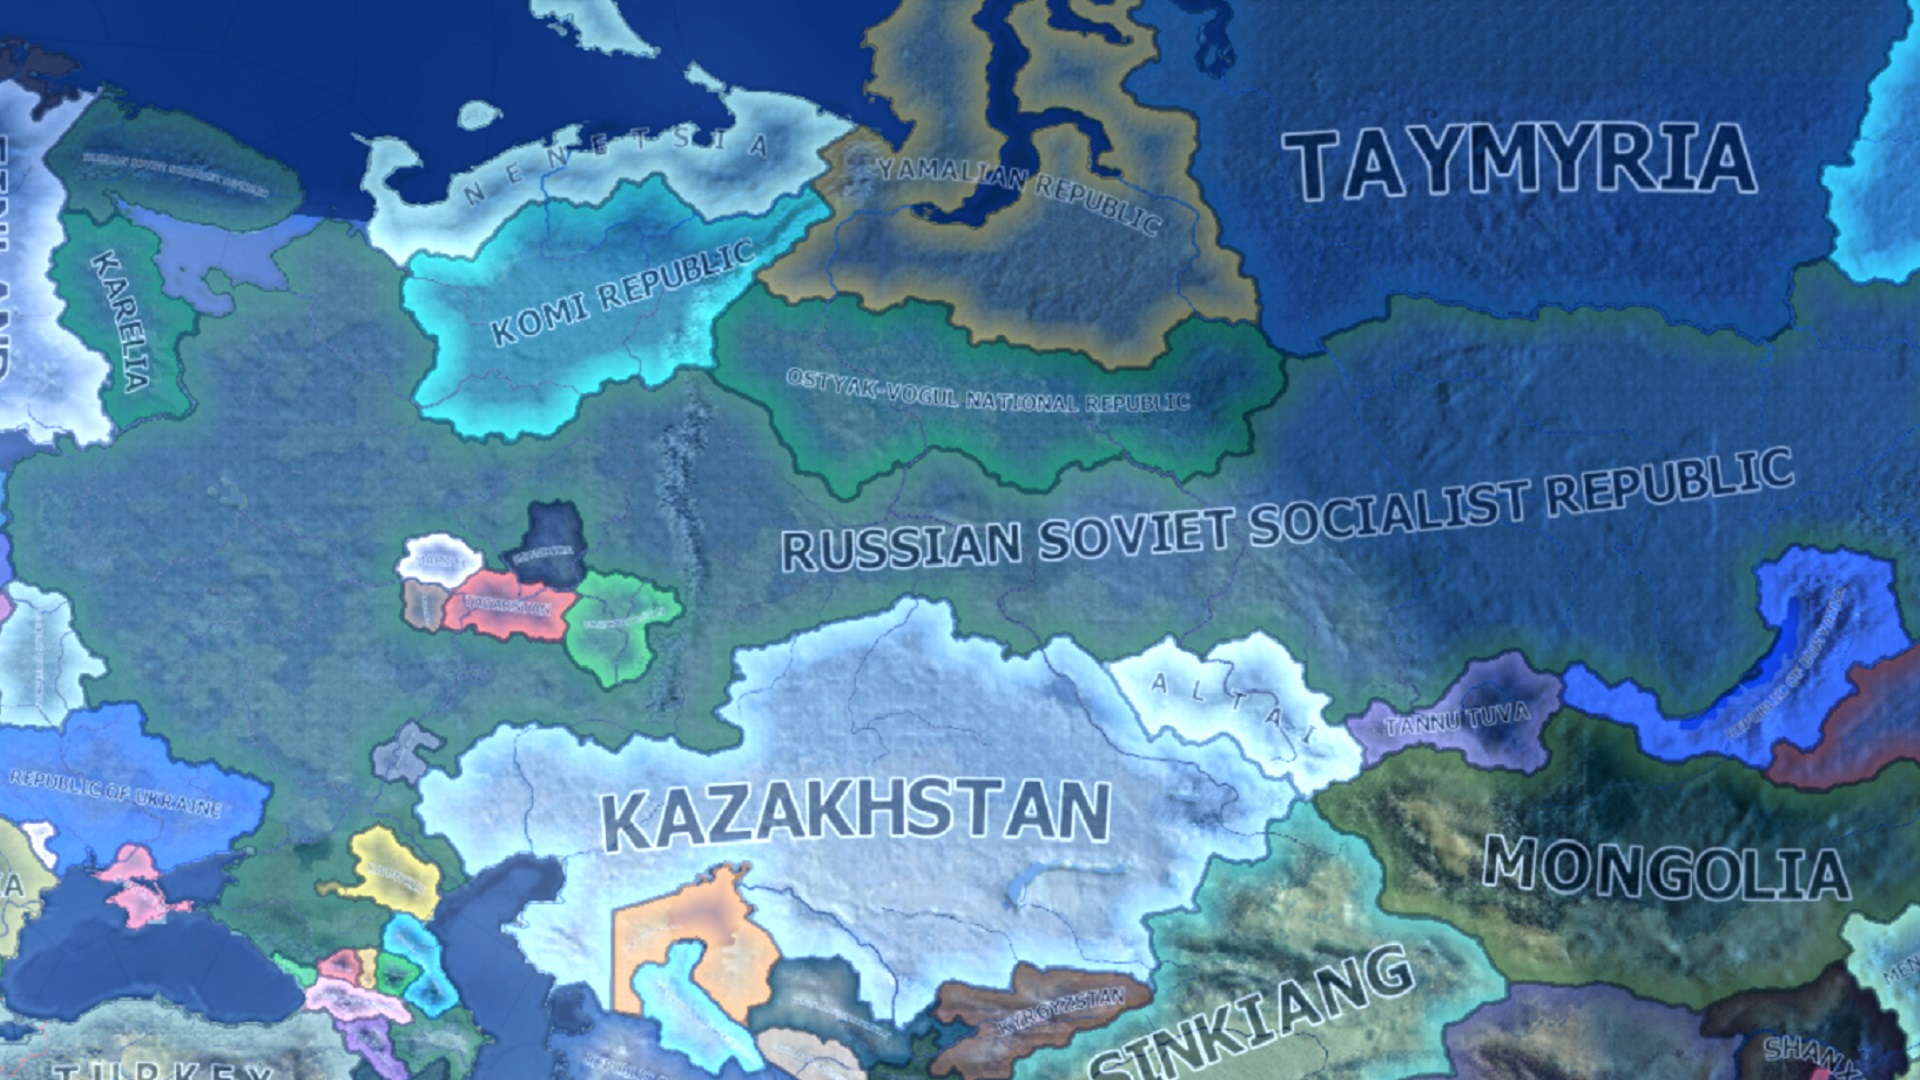 Hearts of Iron 4 hits new concurrent player record five years after launch